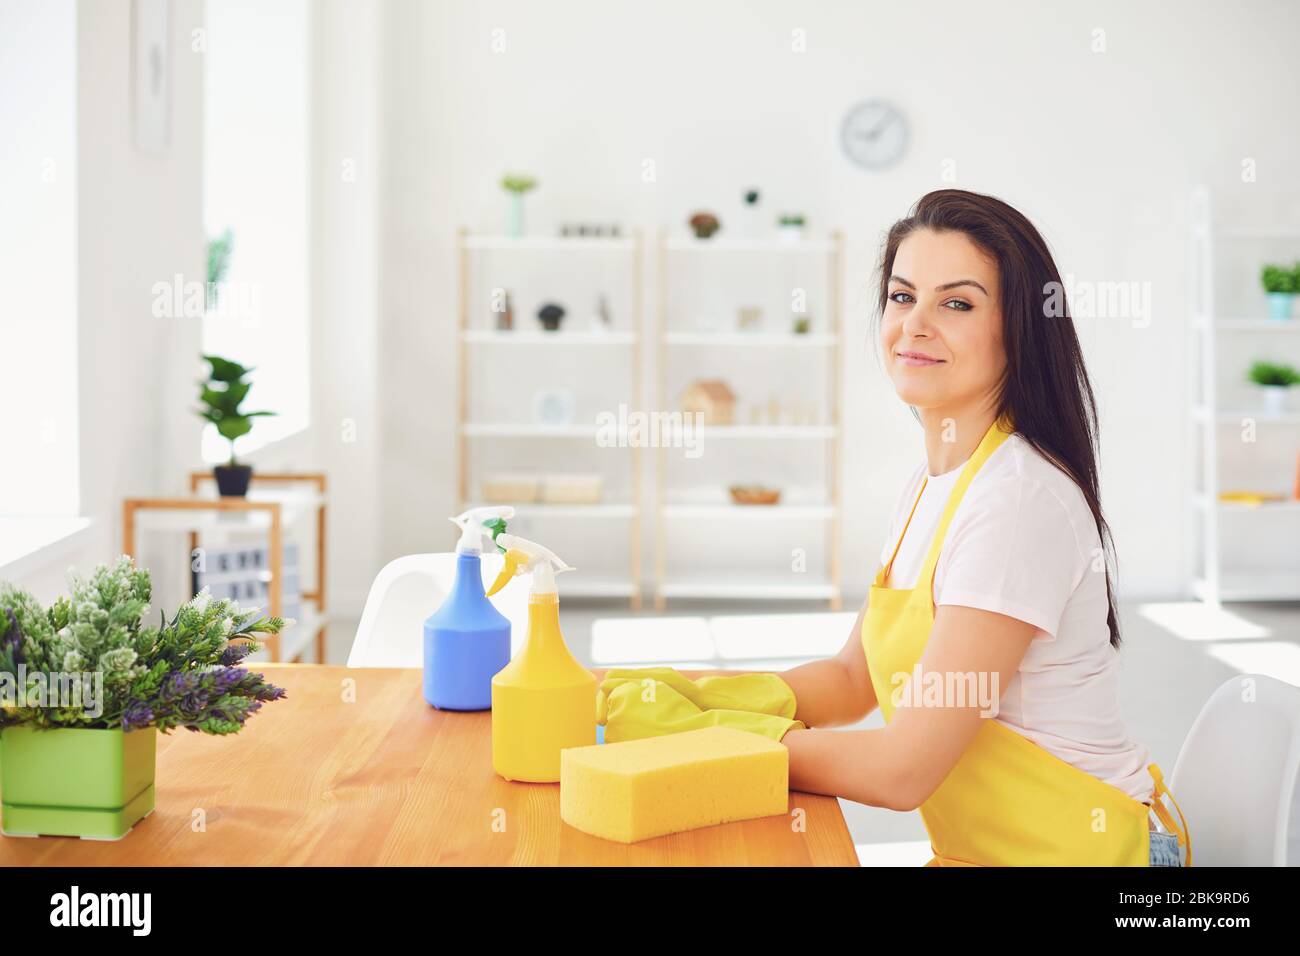 Happy young woman cleans the room in the house. Girl wash in gloves while sitting on the floor smiling joyful. Stock Photo